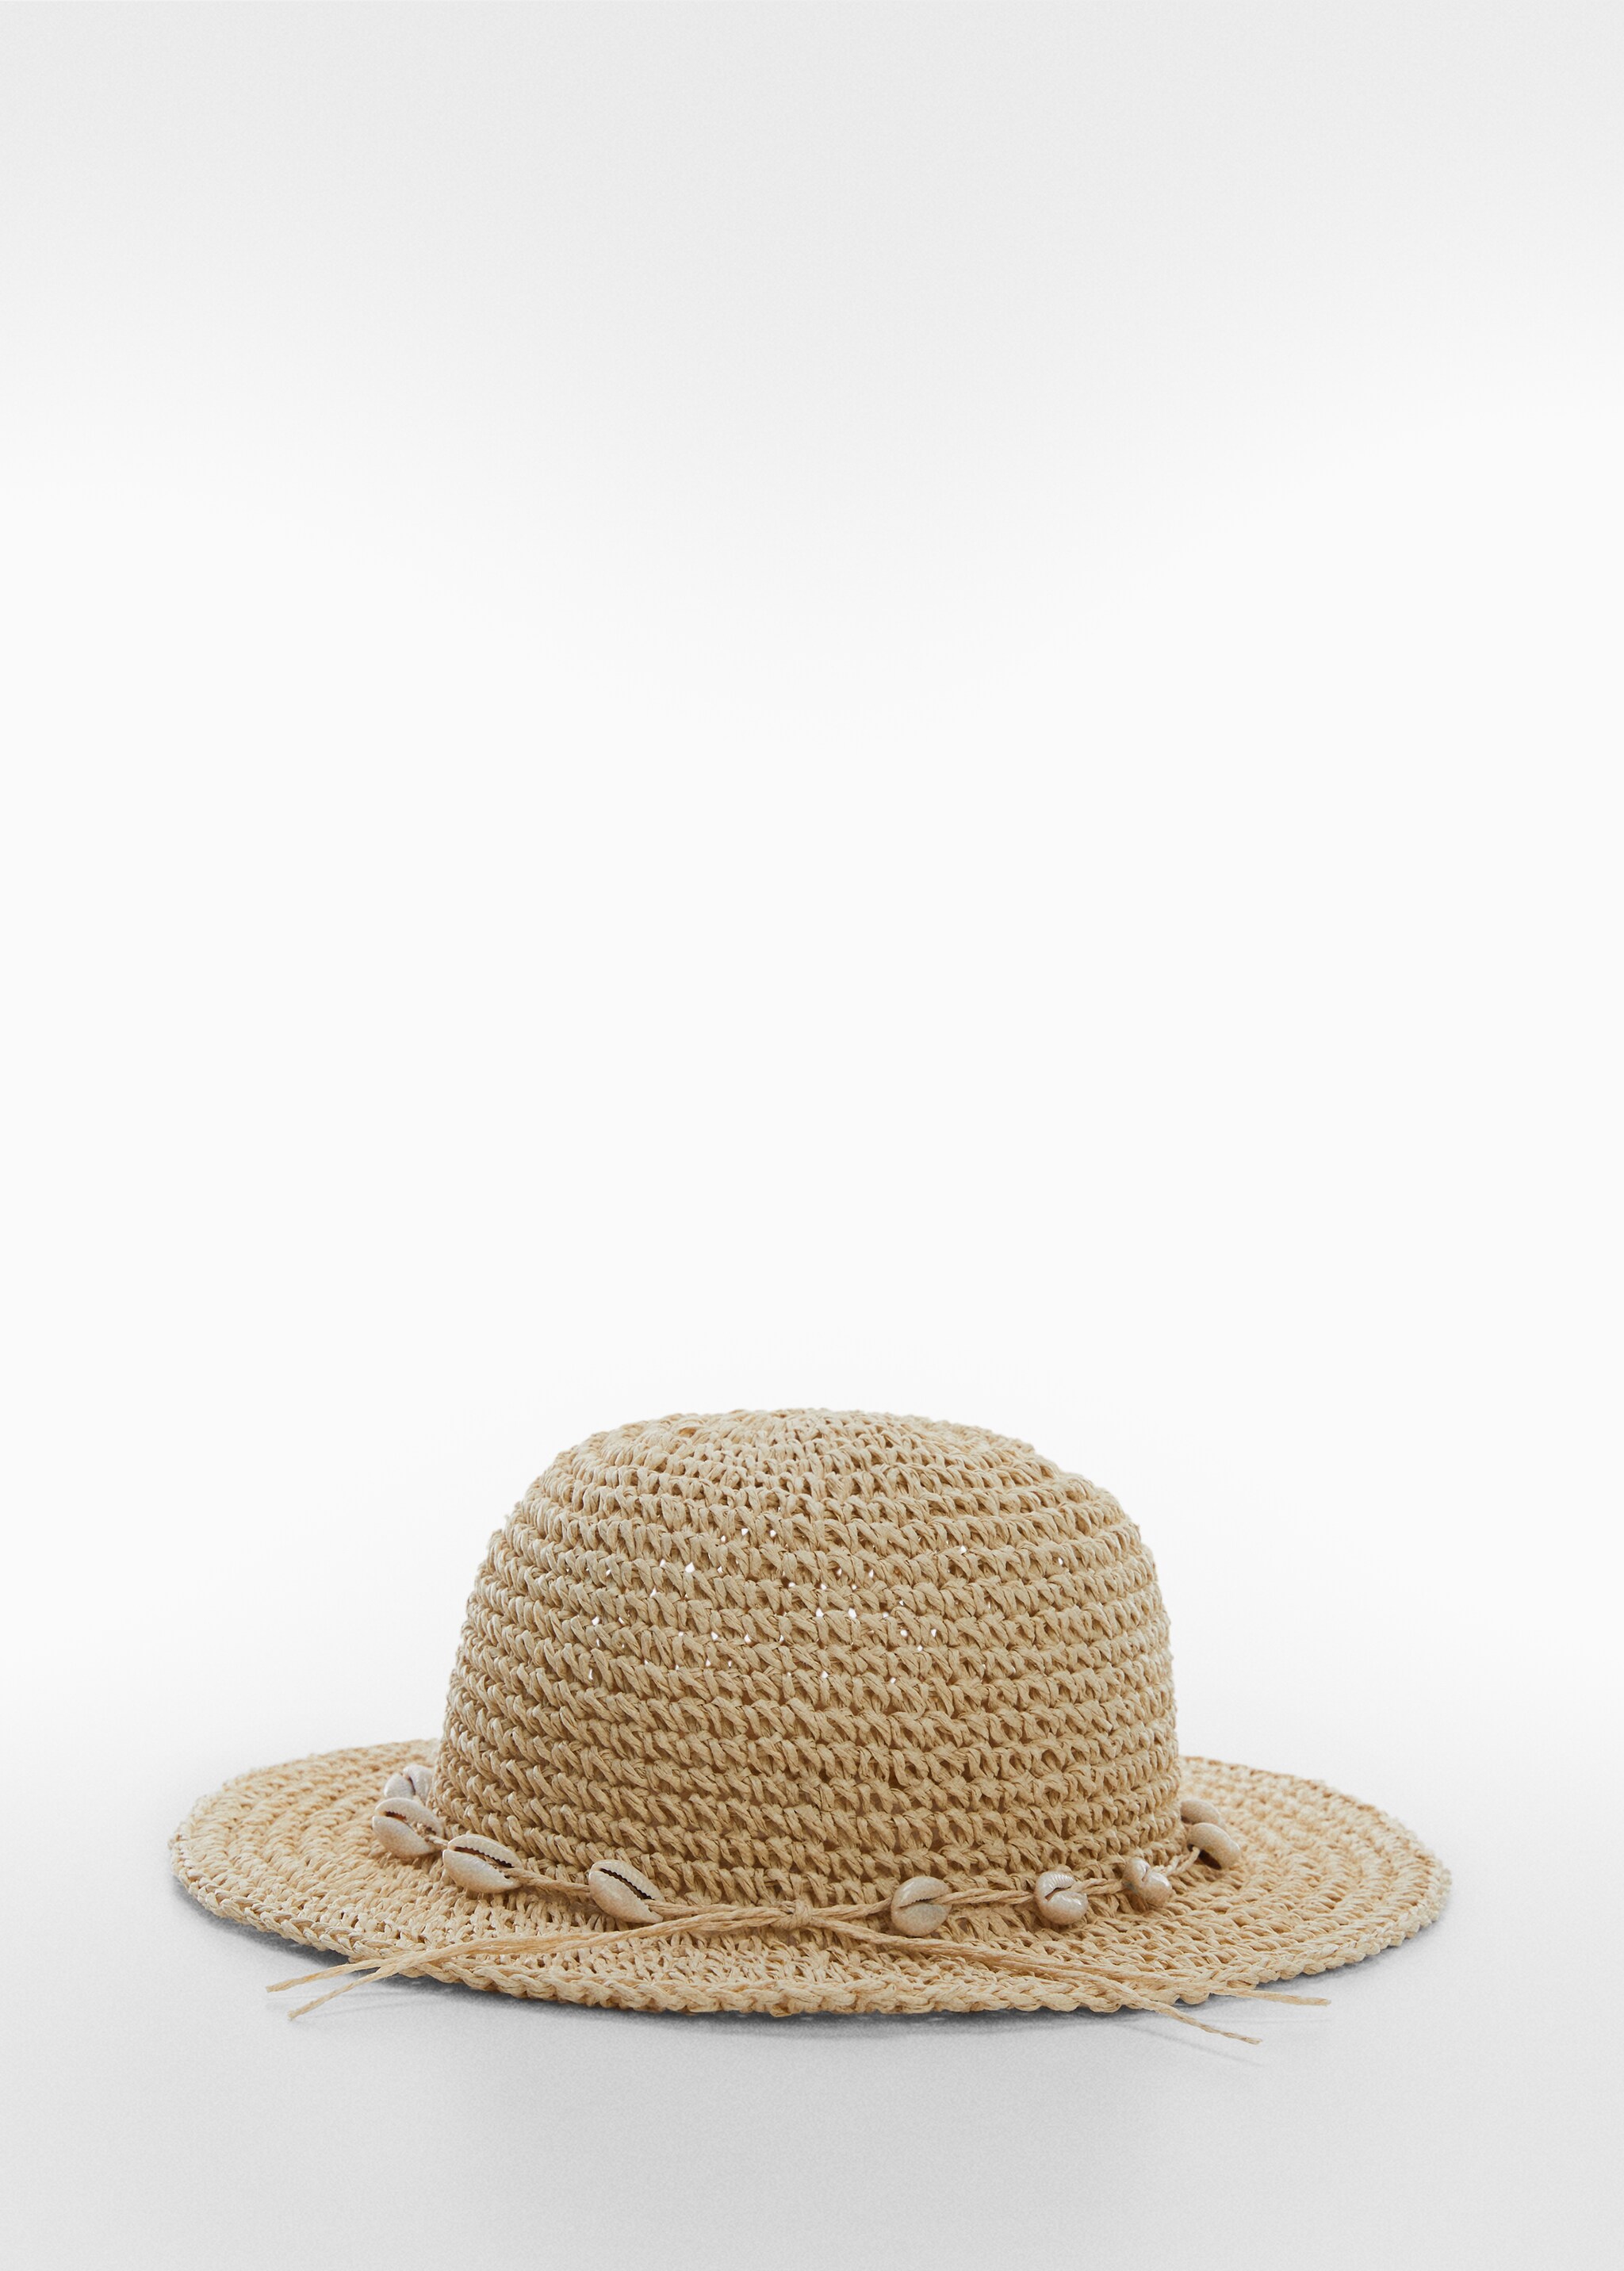 Straw hat - Article without model